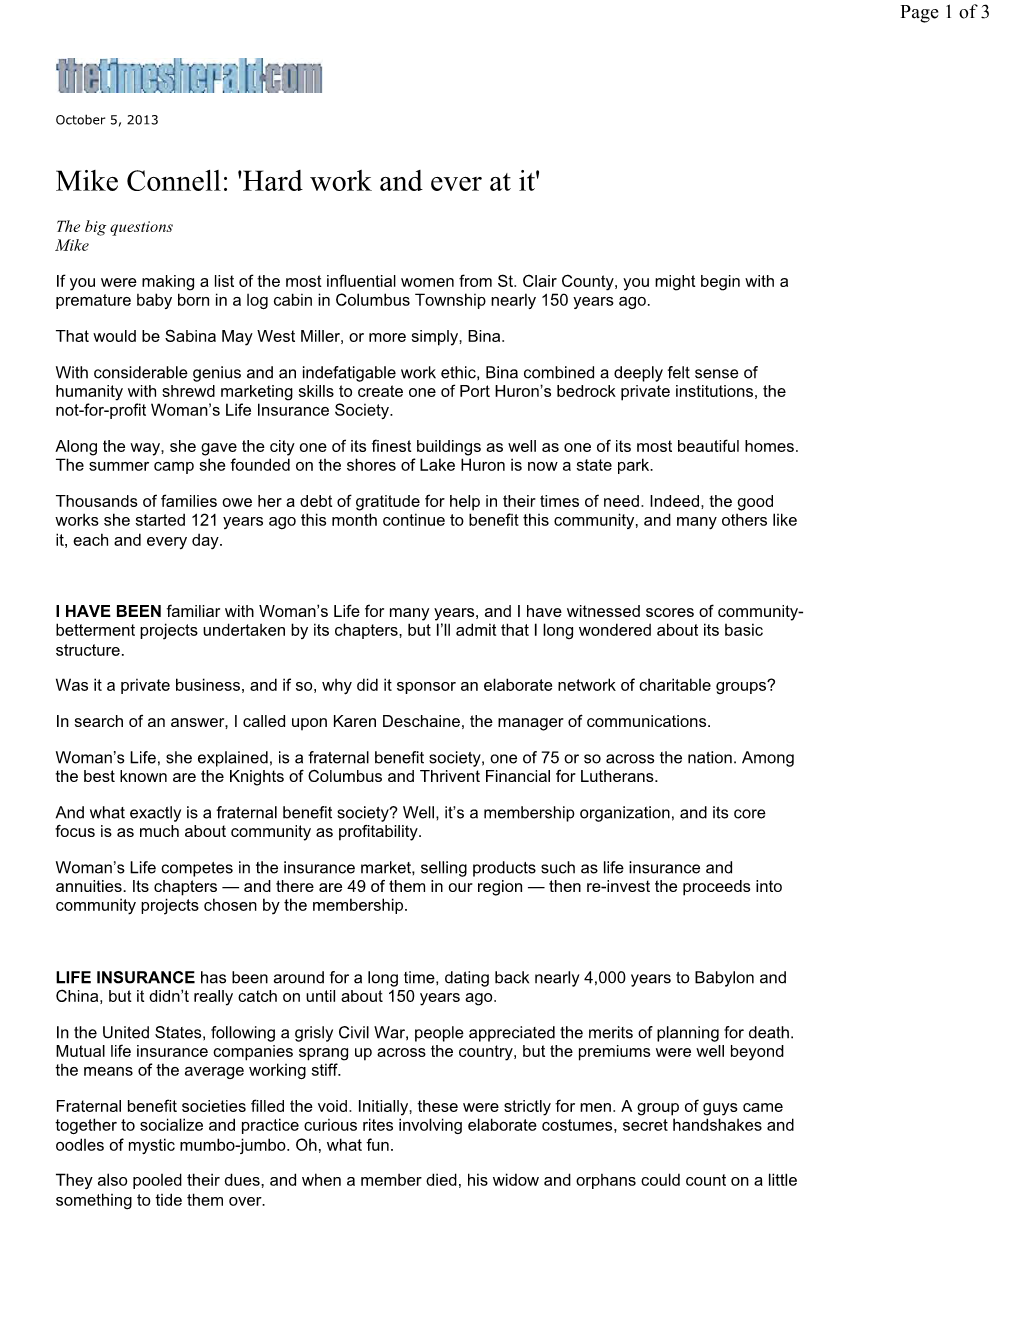 Mike Connell: 'Hard Work and Ever at It'